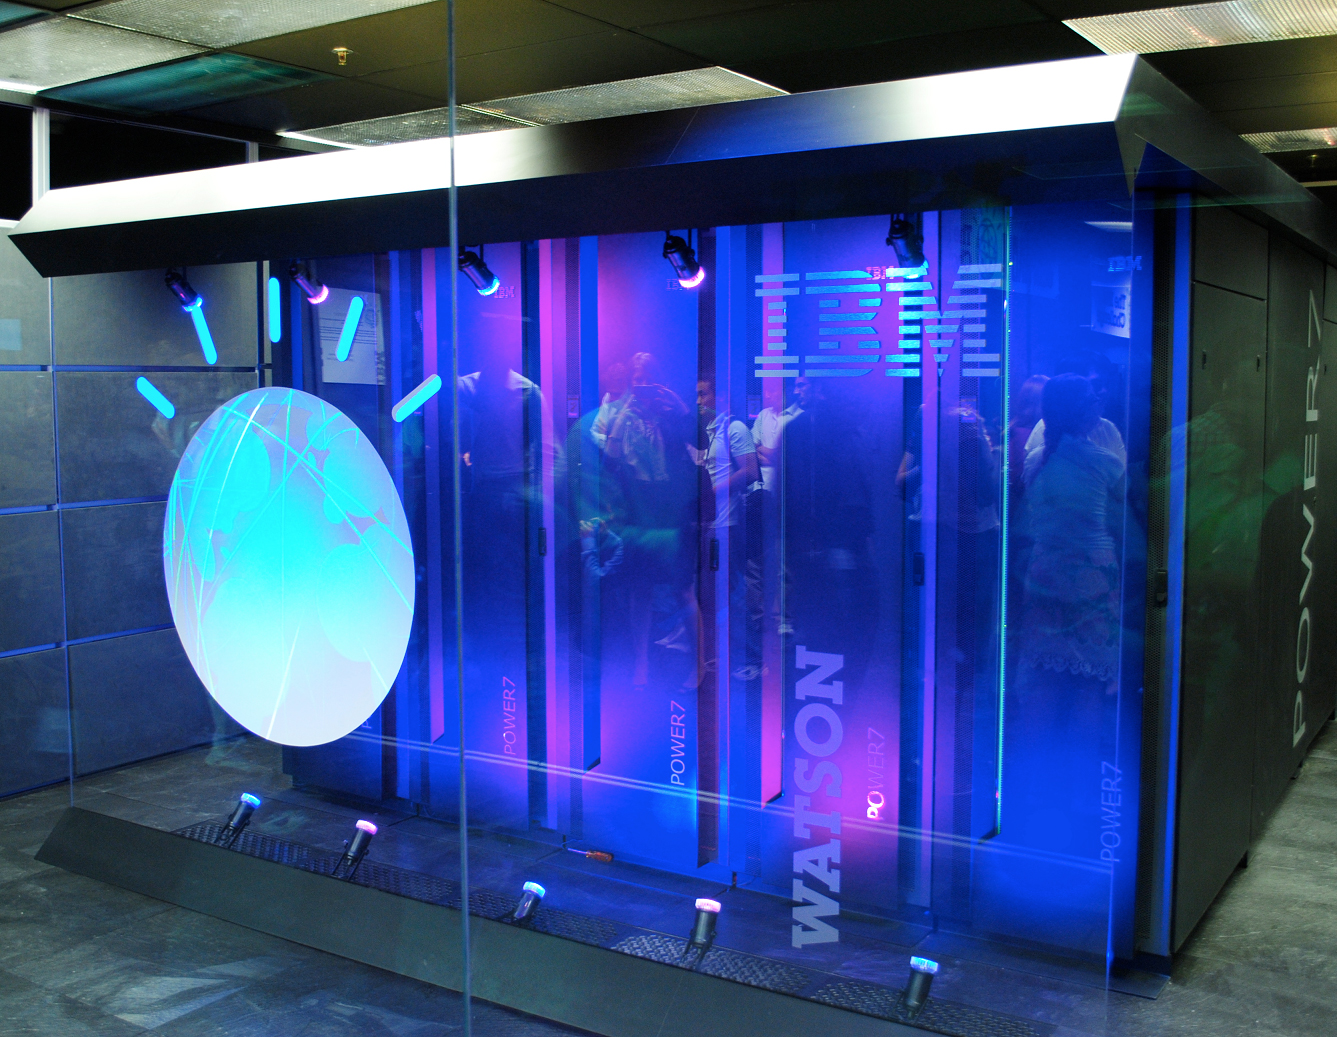 Since the enthusiasm for AI in healthcare brought on by IBM’s Watson, many questions on bias and discrimination in algorithms have emerged. Photo: Wikimedia.